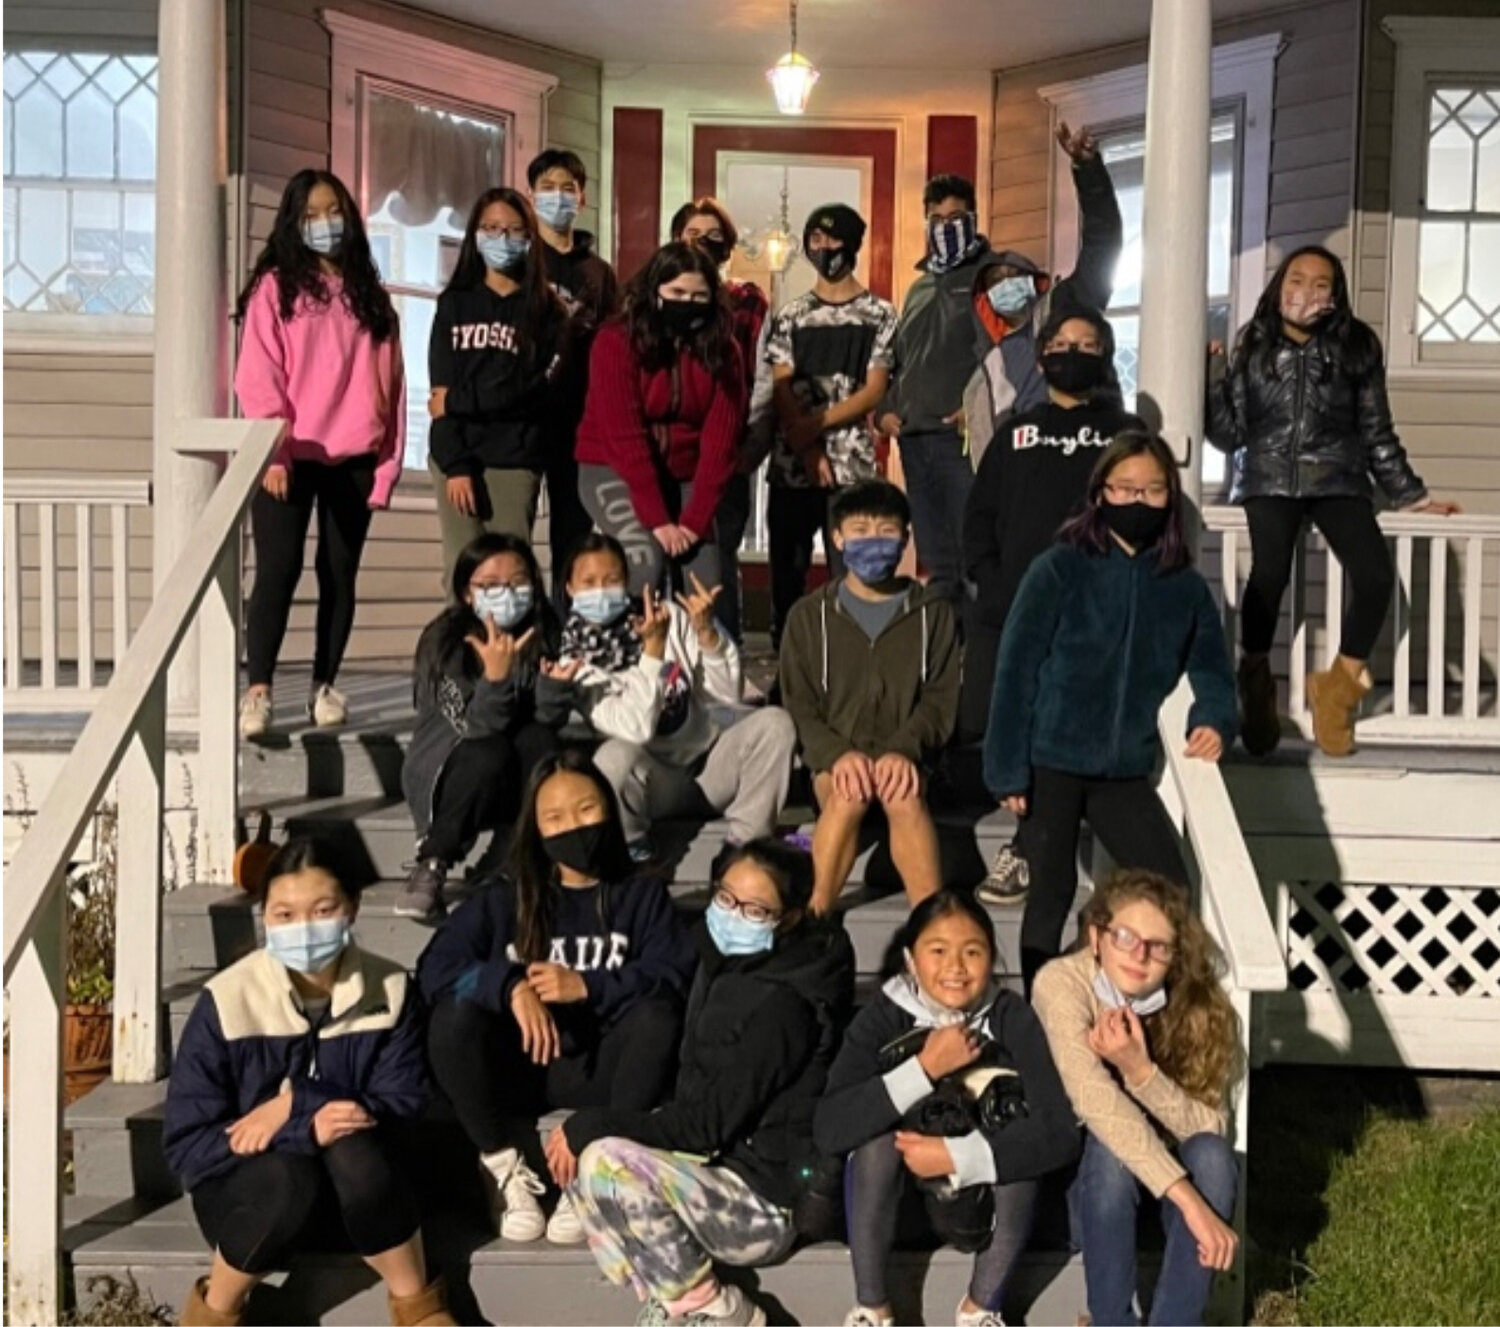 Members of the North Shore Community Church met for outdoor church services during the height of the pandemic. Although they were outside, they wore their masks when close to one another to avoid the spread of Covid-19